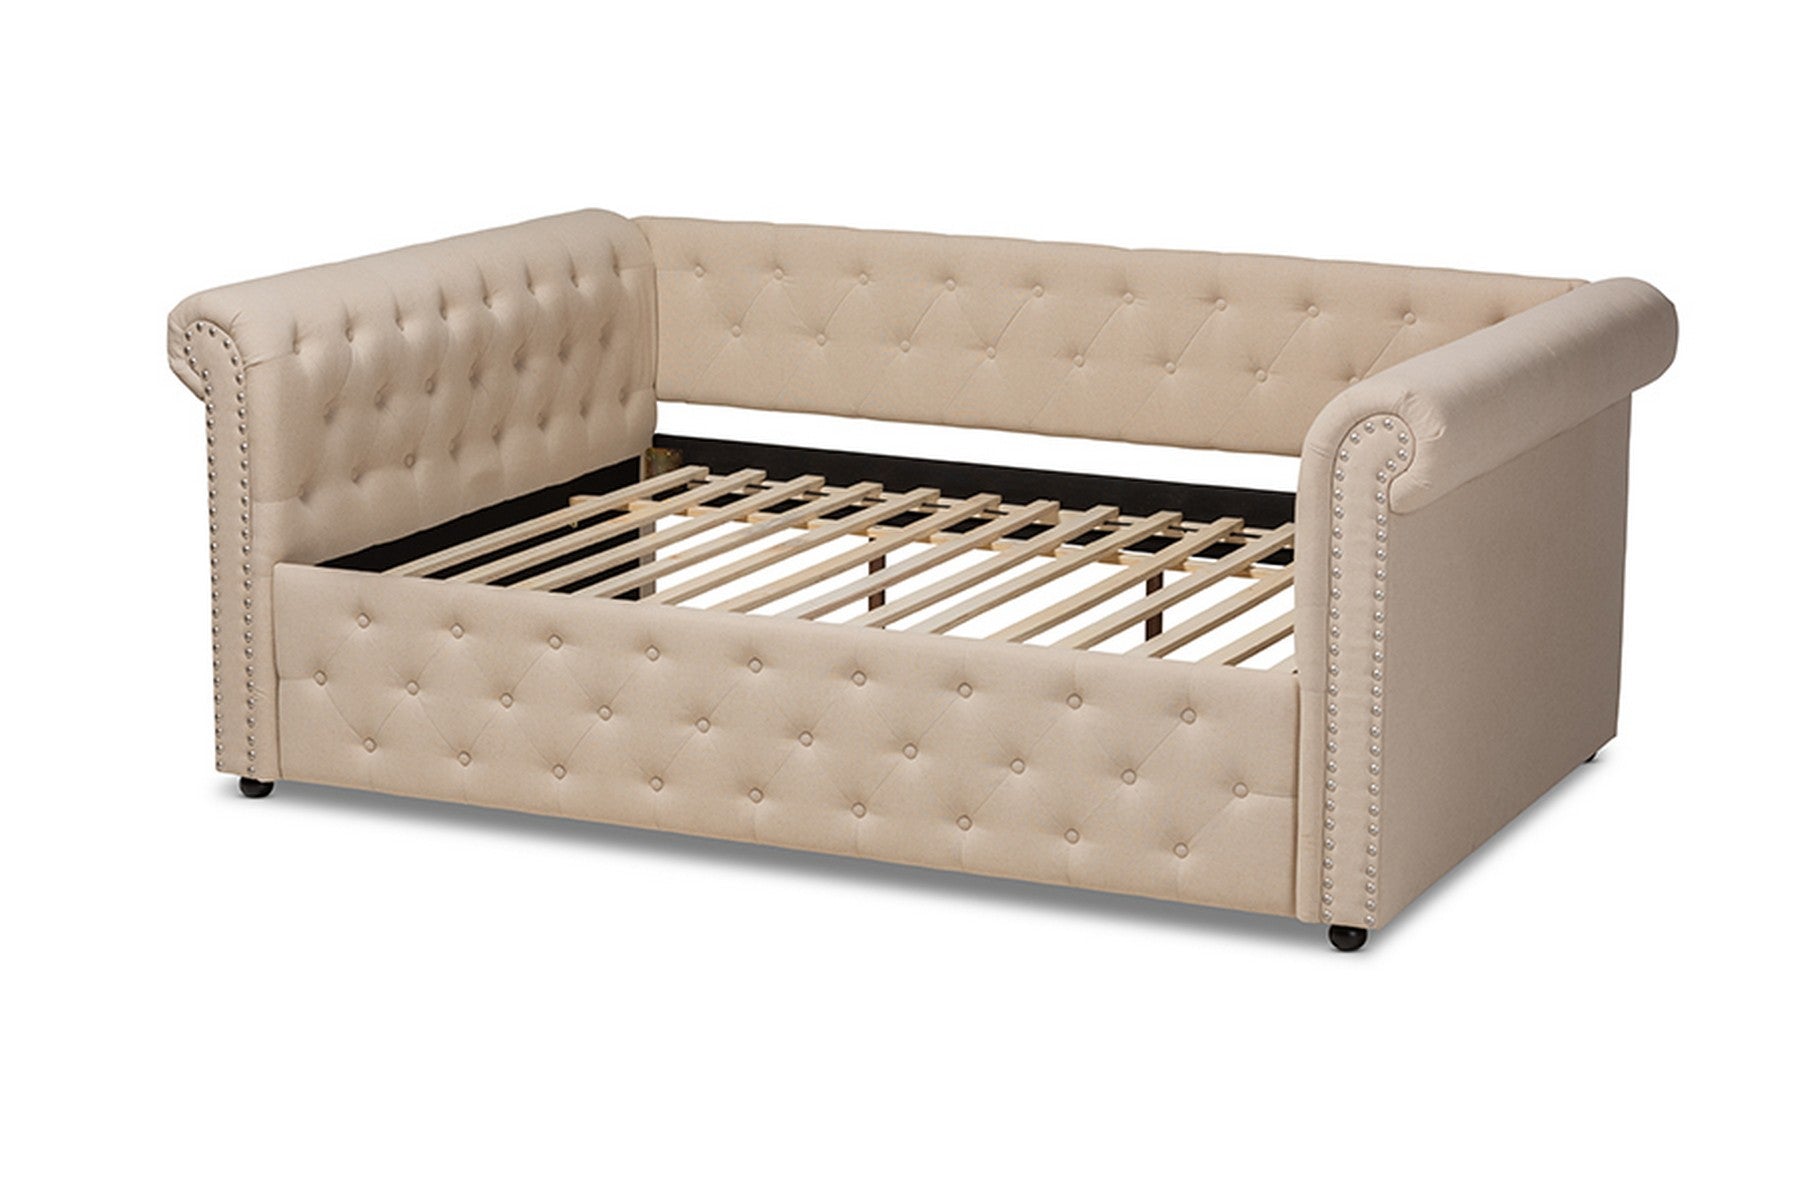 Baxton Studio Mabelle Modern and Contemporary Beige Fabric Upholstered Full Size Daybed